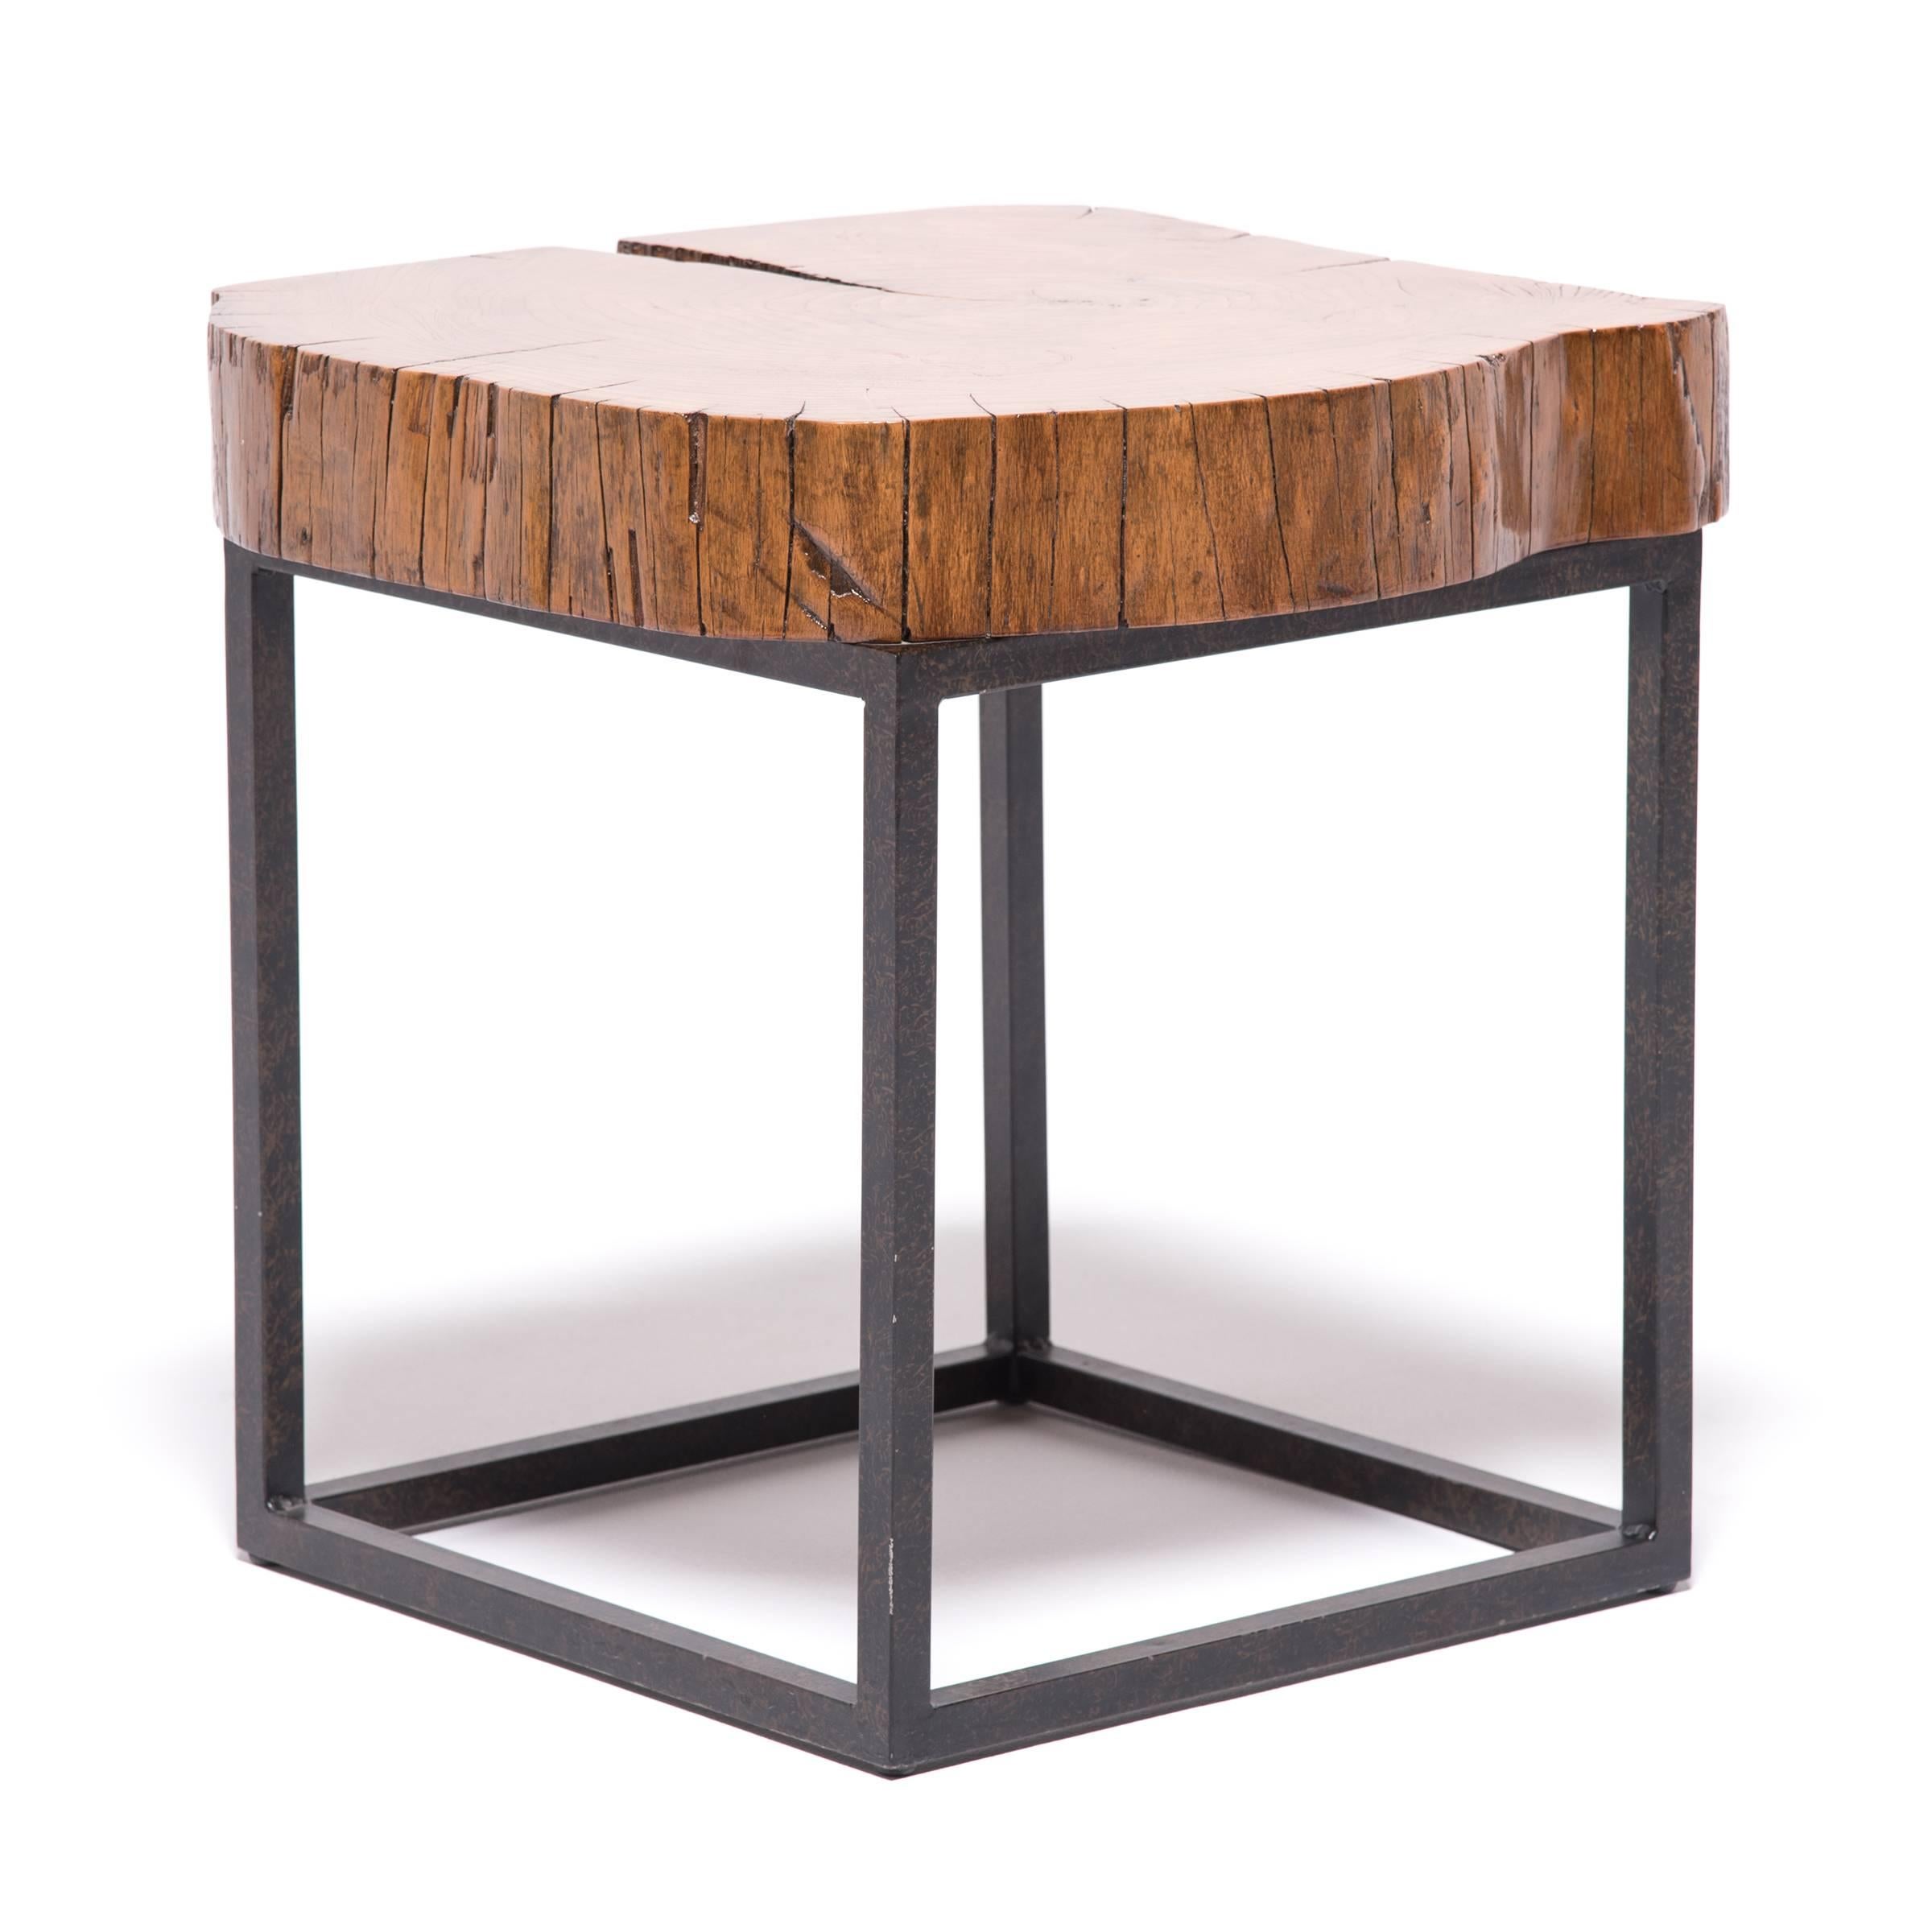 This smart, contemporary table was made in Canton, China. It has a reclaimed elmwood top: a favorite for Ming and Qing dynasty Chinese furniture-makers. The raw, natural edges of the wood contrast beautifully with the hard lines of the contemporary